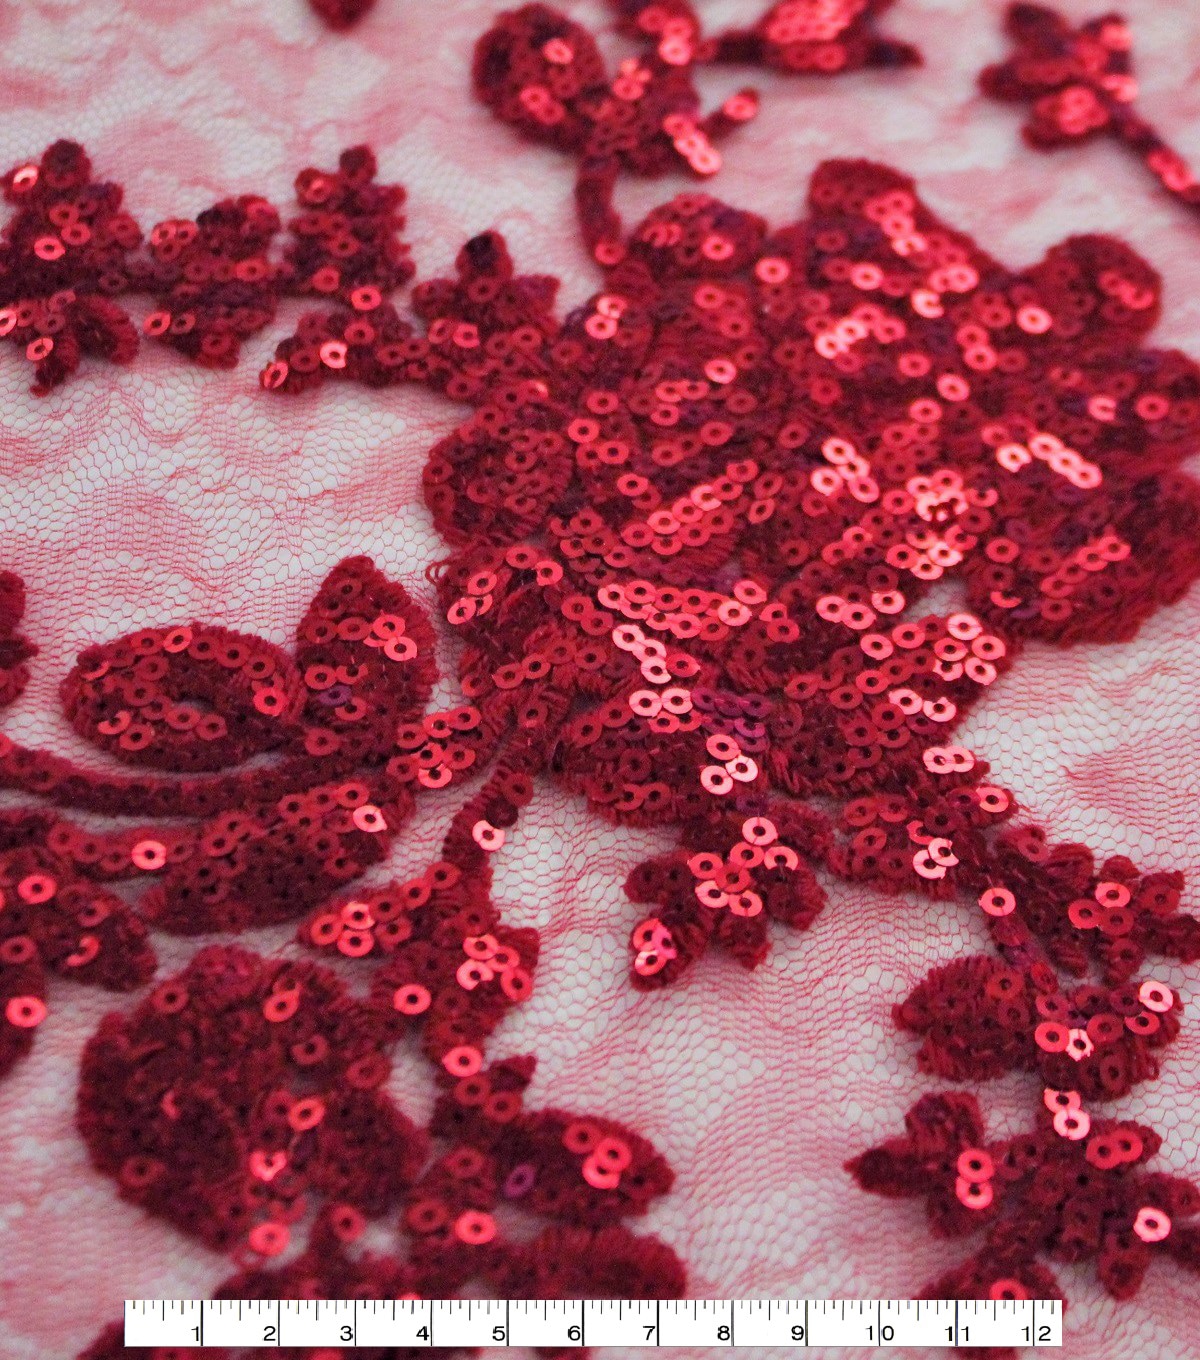 Casa Embellish Ember Sequin Fabric Rio Red Lace | JOANN